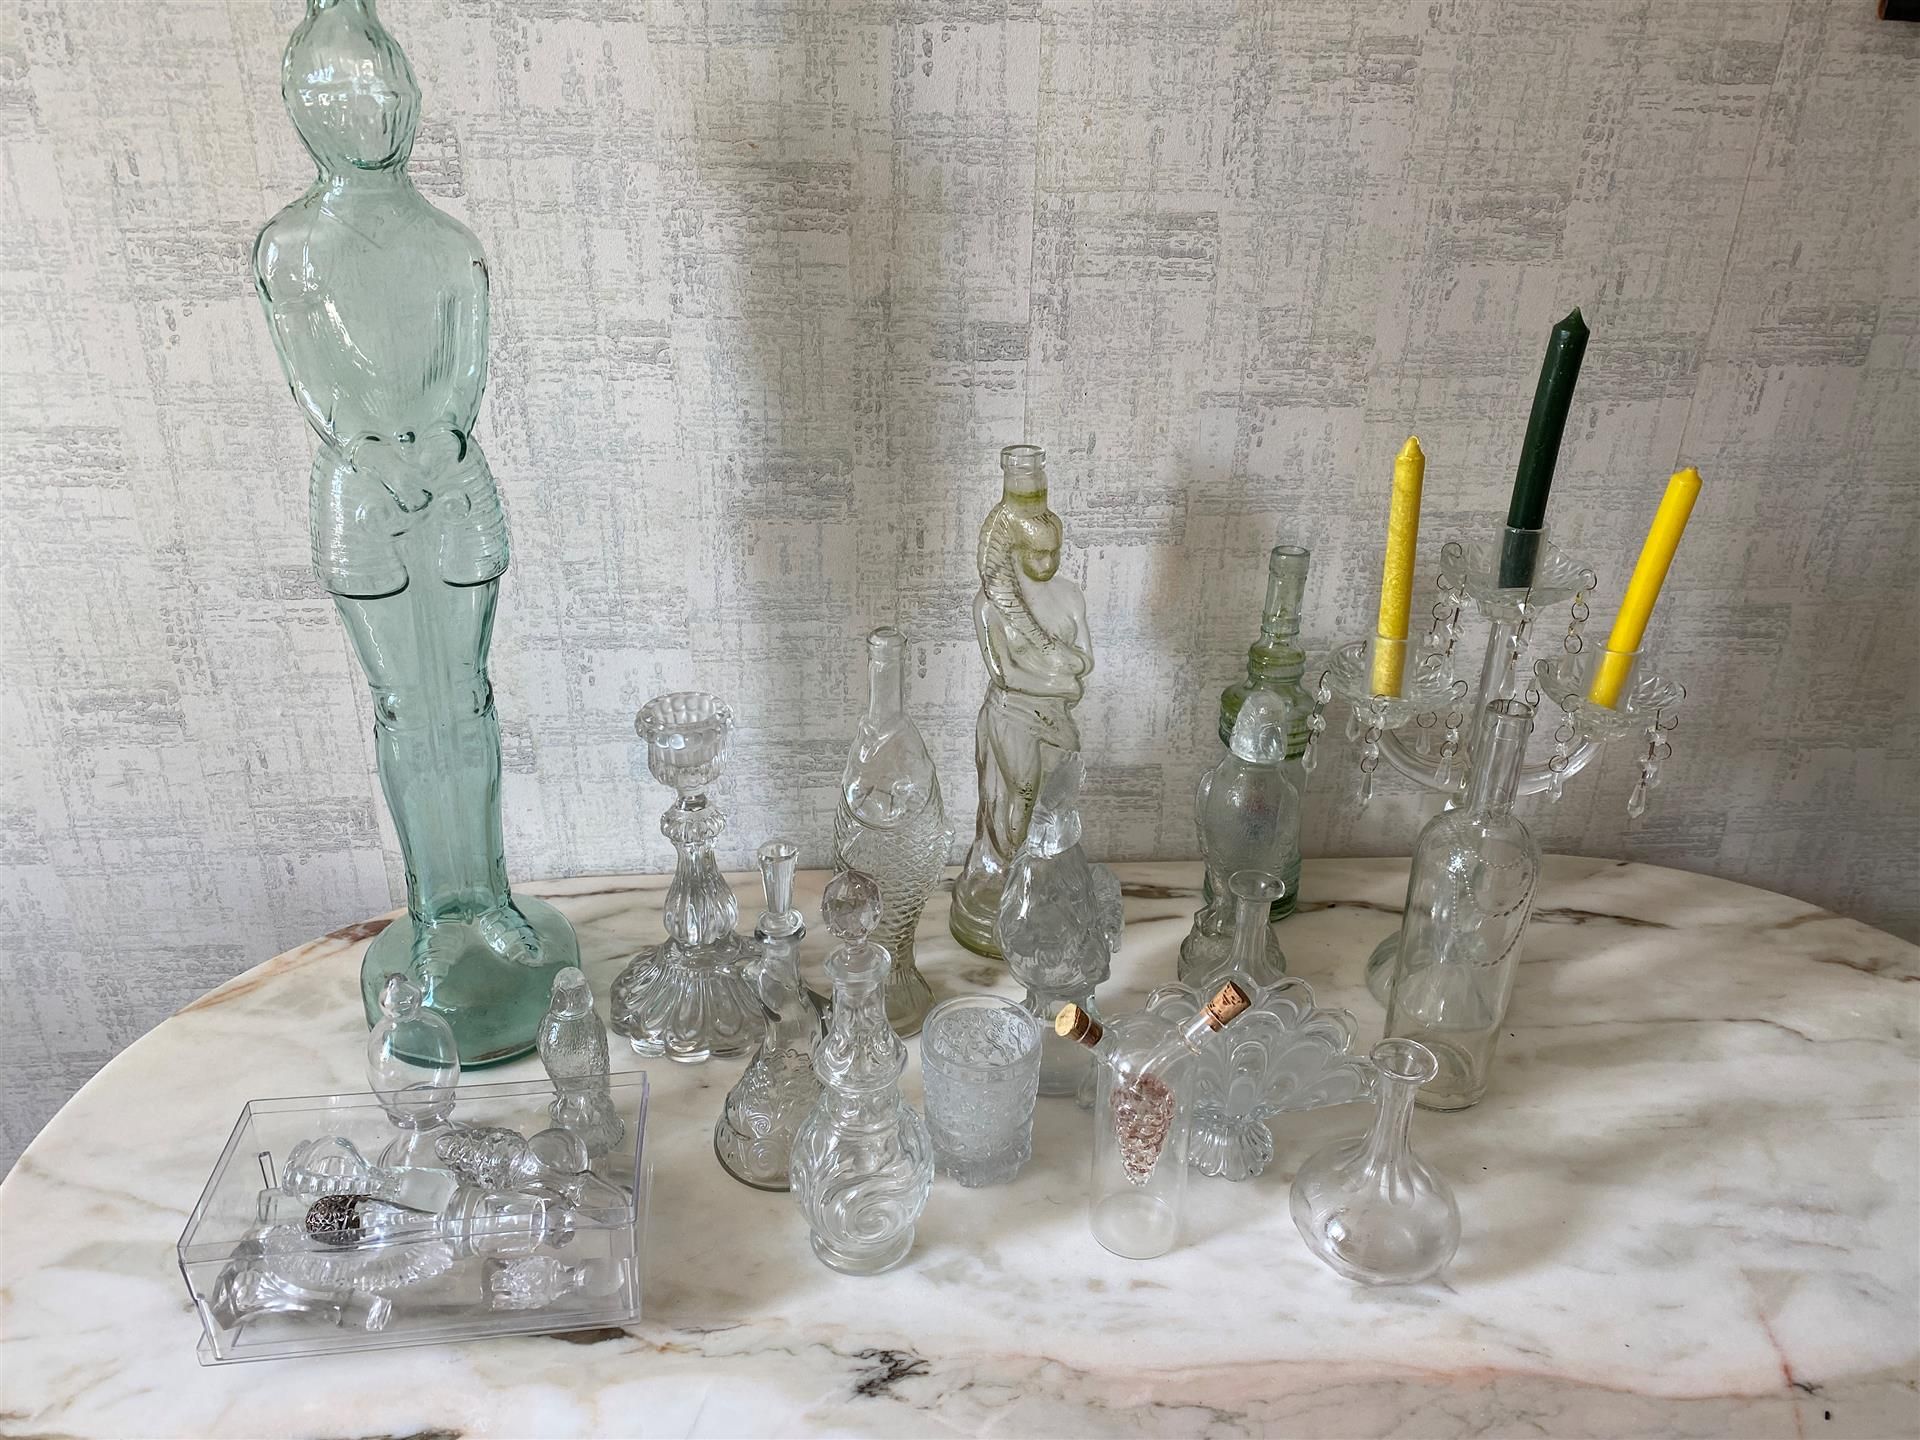 Null Collection of moulded glass bottles

(As is)